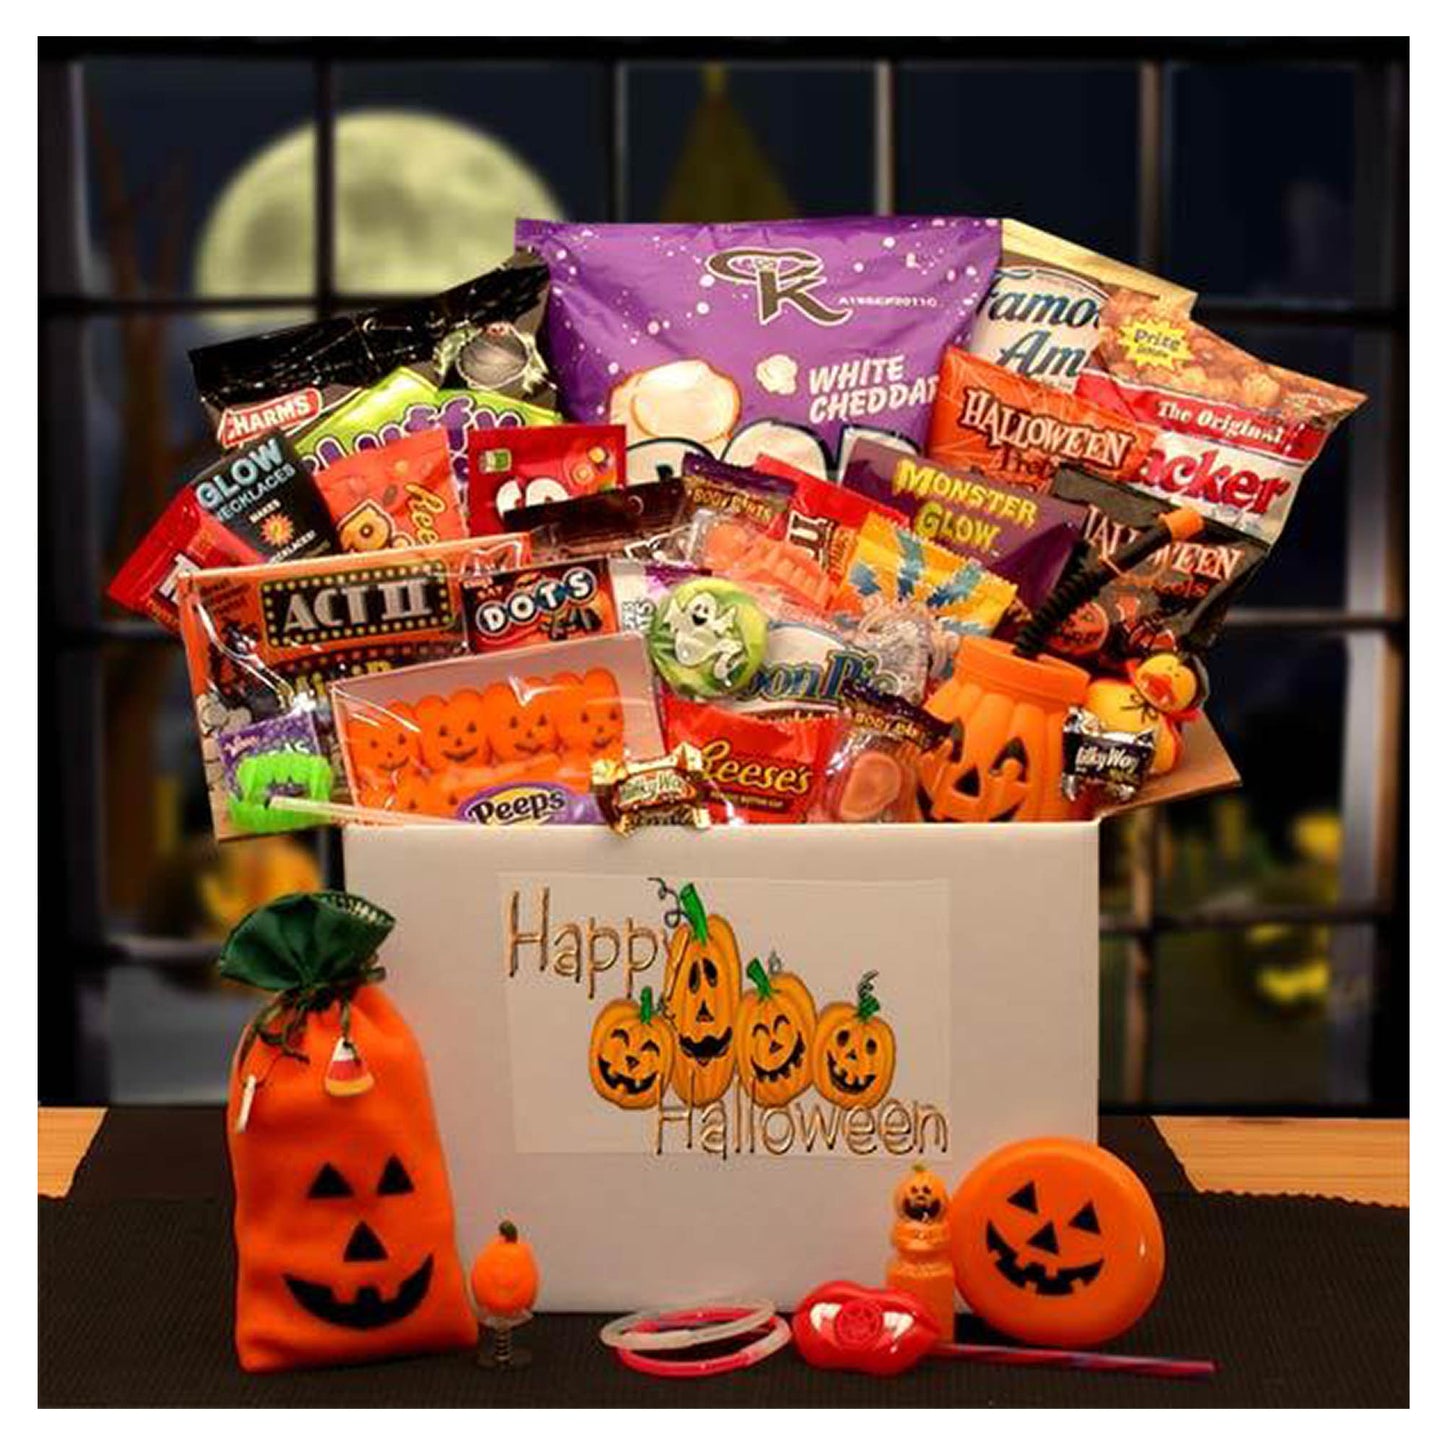 The Halloween Sampler Care Package